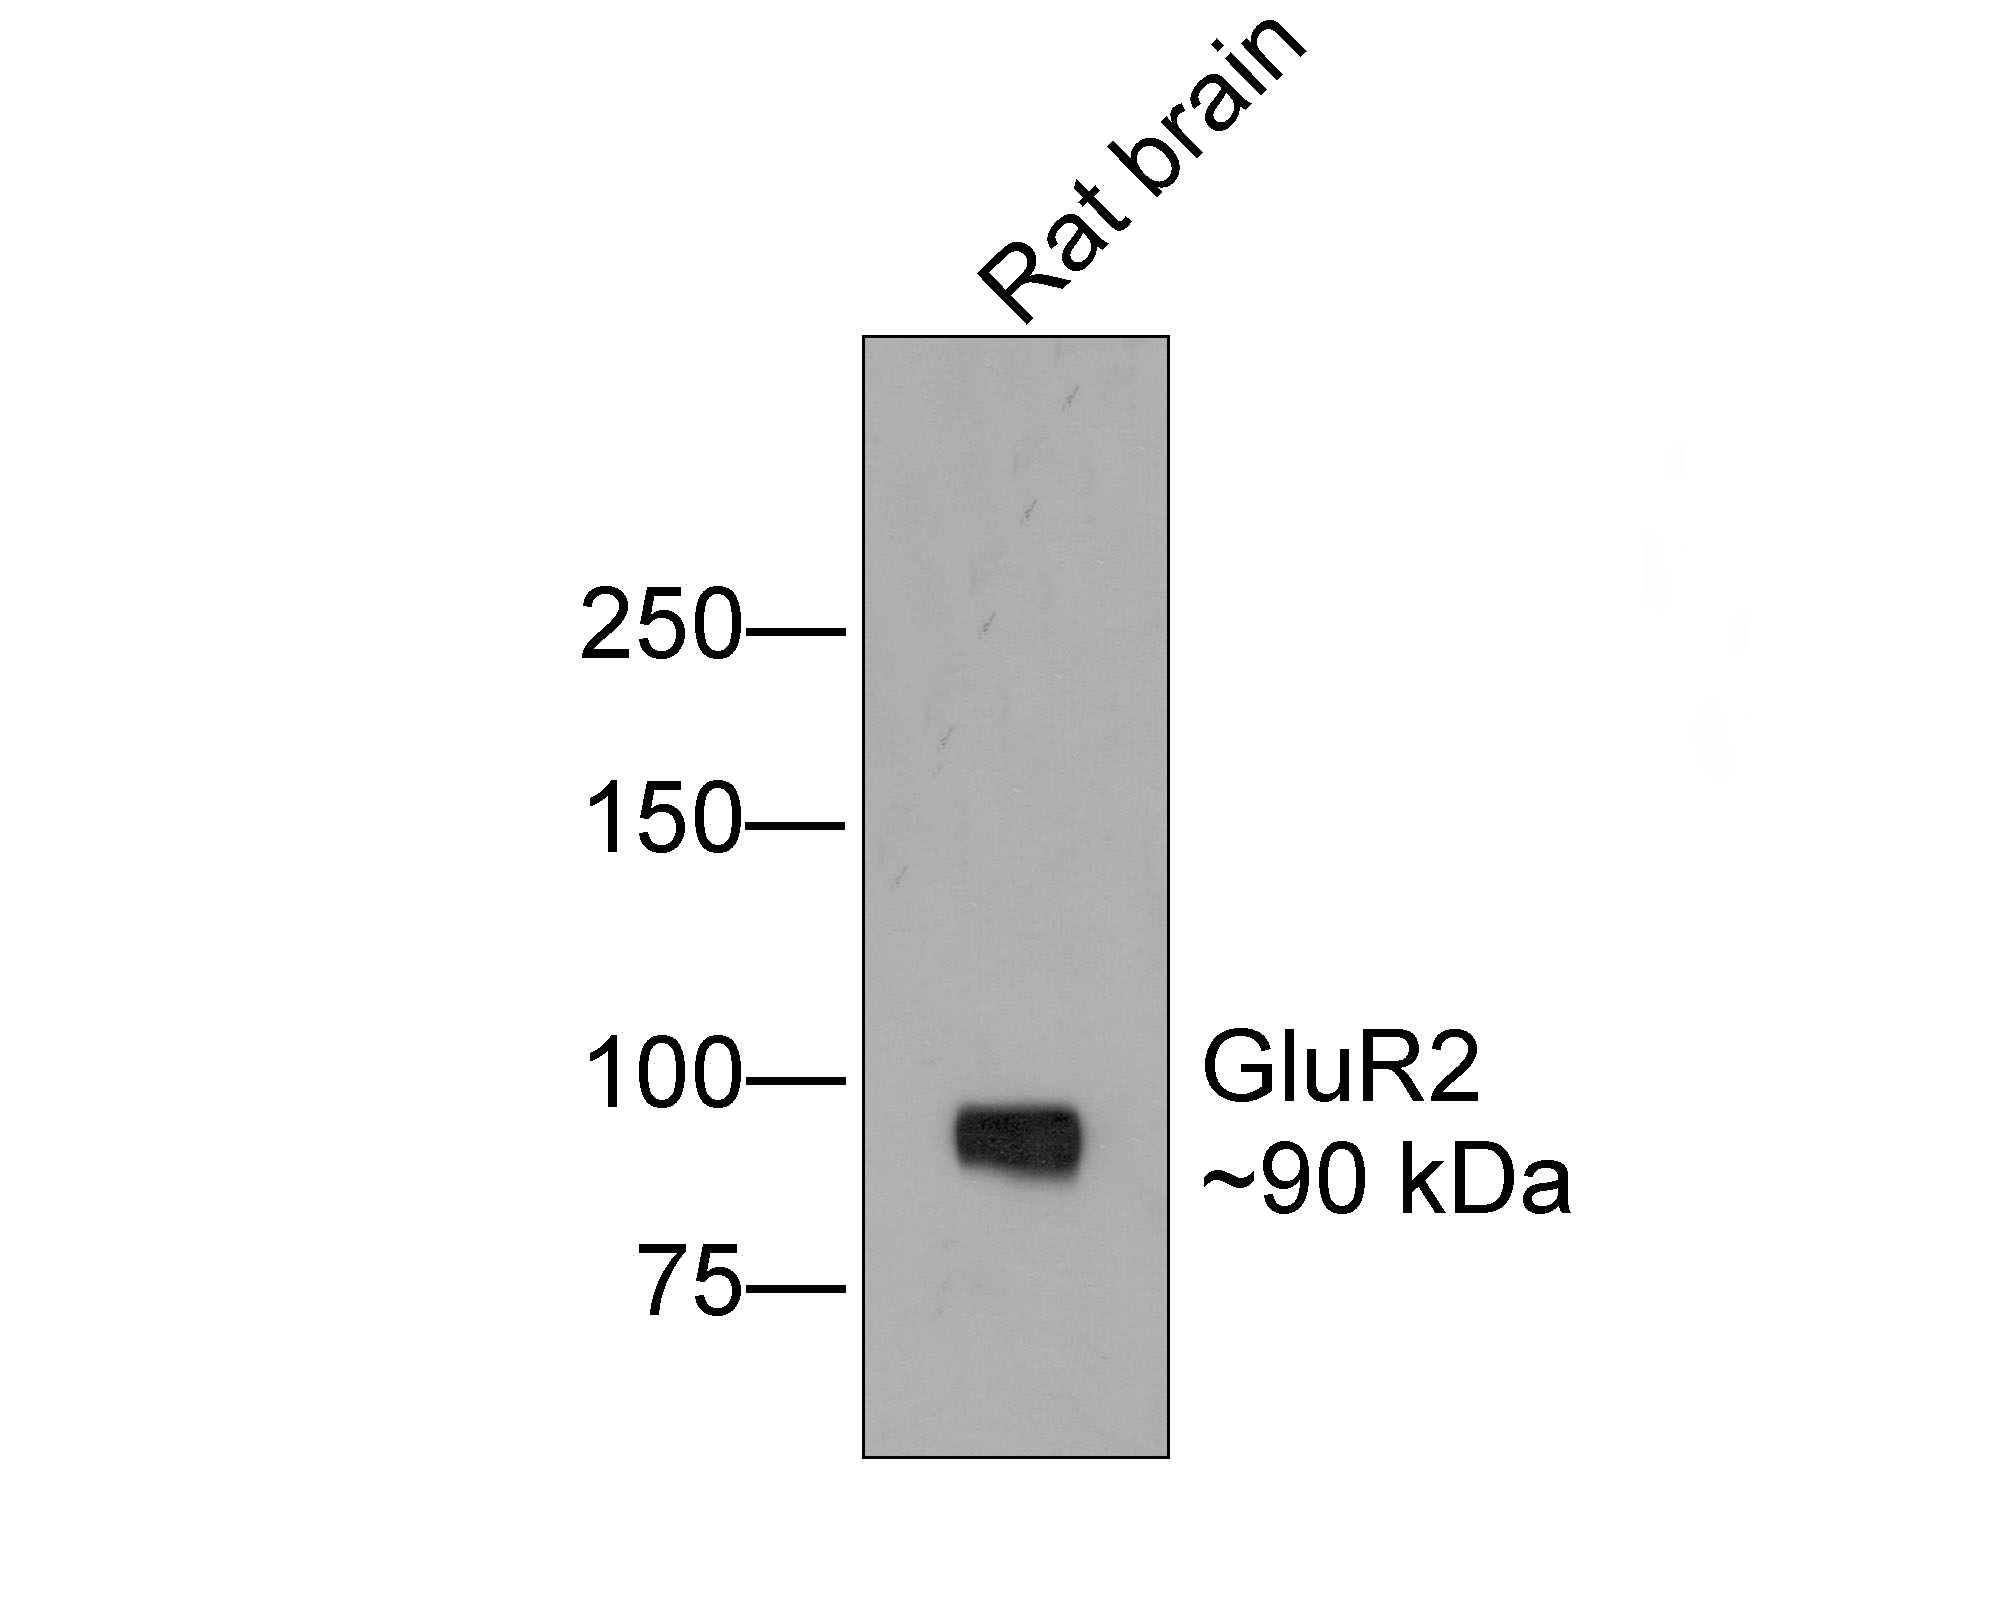 ICC staining of GluR2 in N2A cells (green). Formalin fixed cells were permeabilized with 0.1% Triton X-100 in TBS for 10 minutes at room temperature and blocked with 1% Blocker BSA for 15 minutes at room temperature. Cells were probed with the primary antibody (ET1706-06, 1/50) for 1 hour at room temperature, washed with PBS. Alexa Fluor®488 Goat anti-Rabbit IgG was used as the secondary antibody at 1/1,000 dilution. The nuclear counter stain is DAPI (blue).